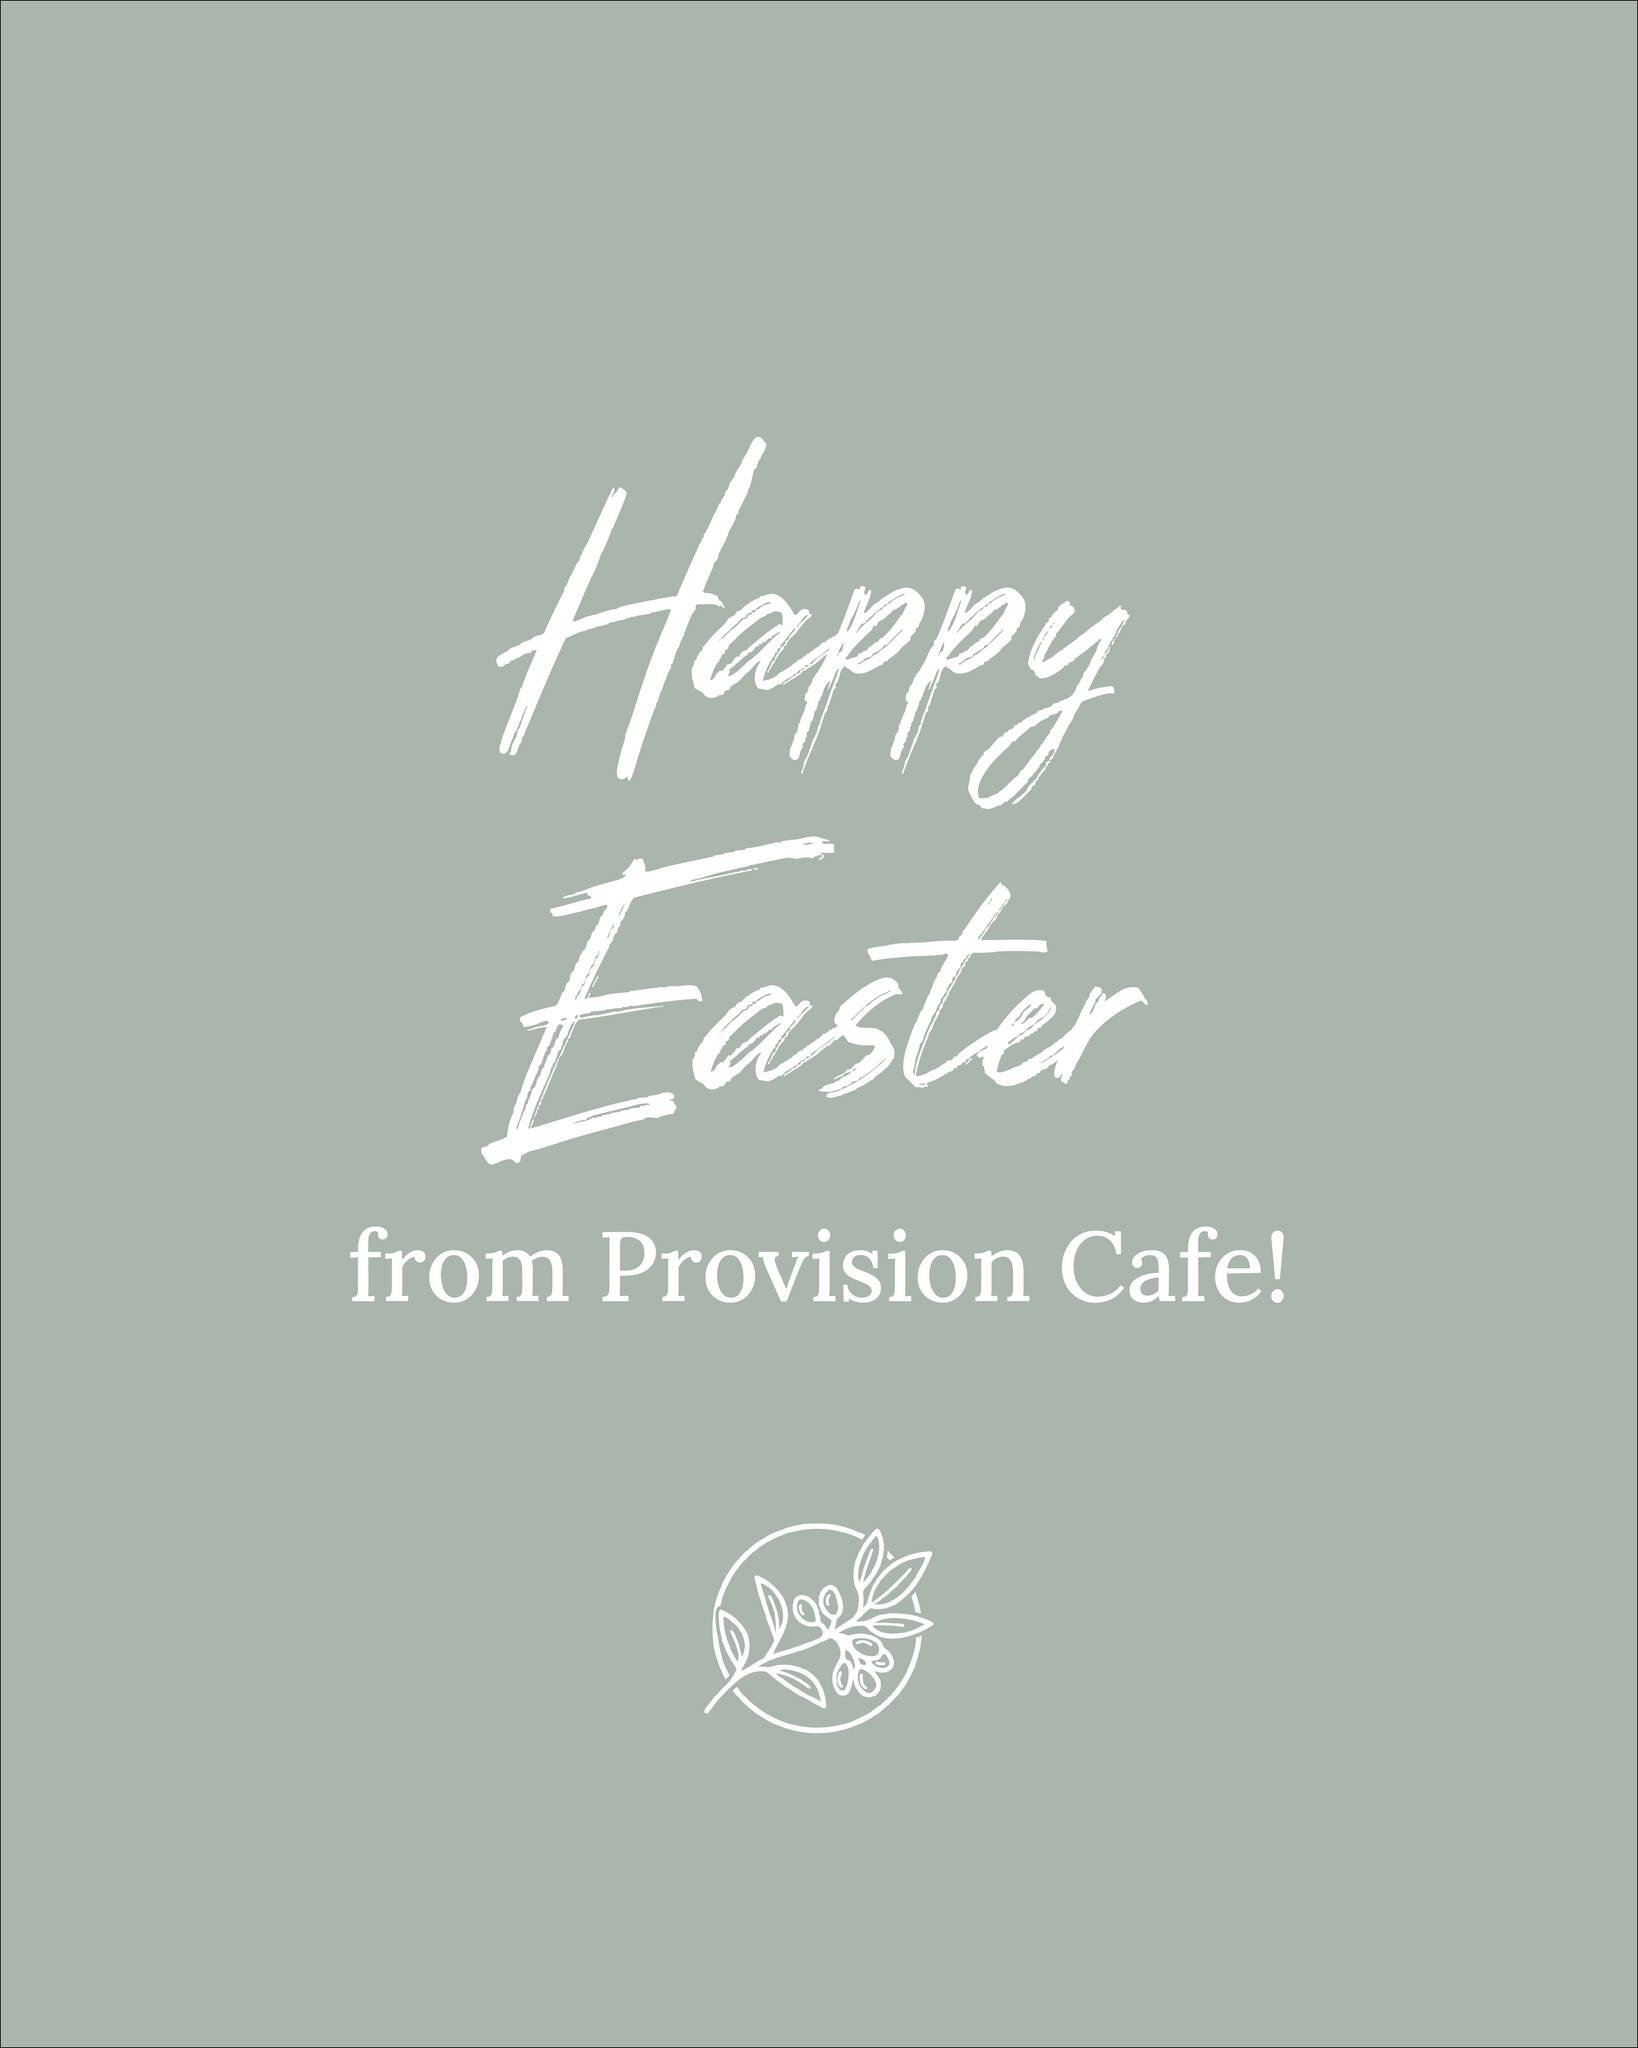 happy easter, friends! 🌸🌼 we hope everyone's day is filled with all the joy and love.

stop in until 1pm today ... we can't wait to see your smiling faces!